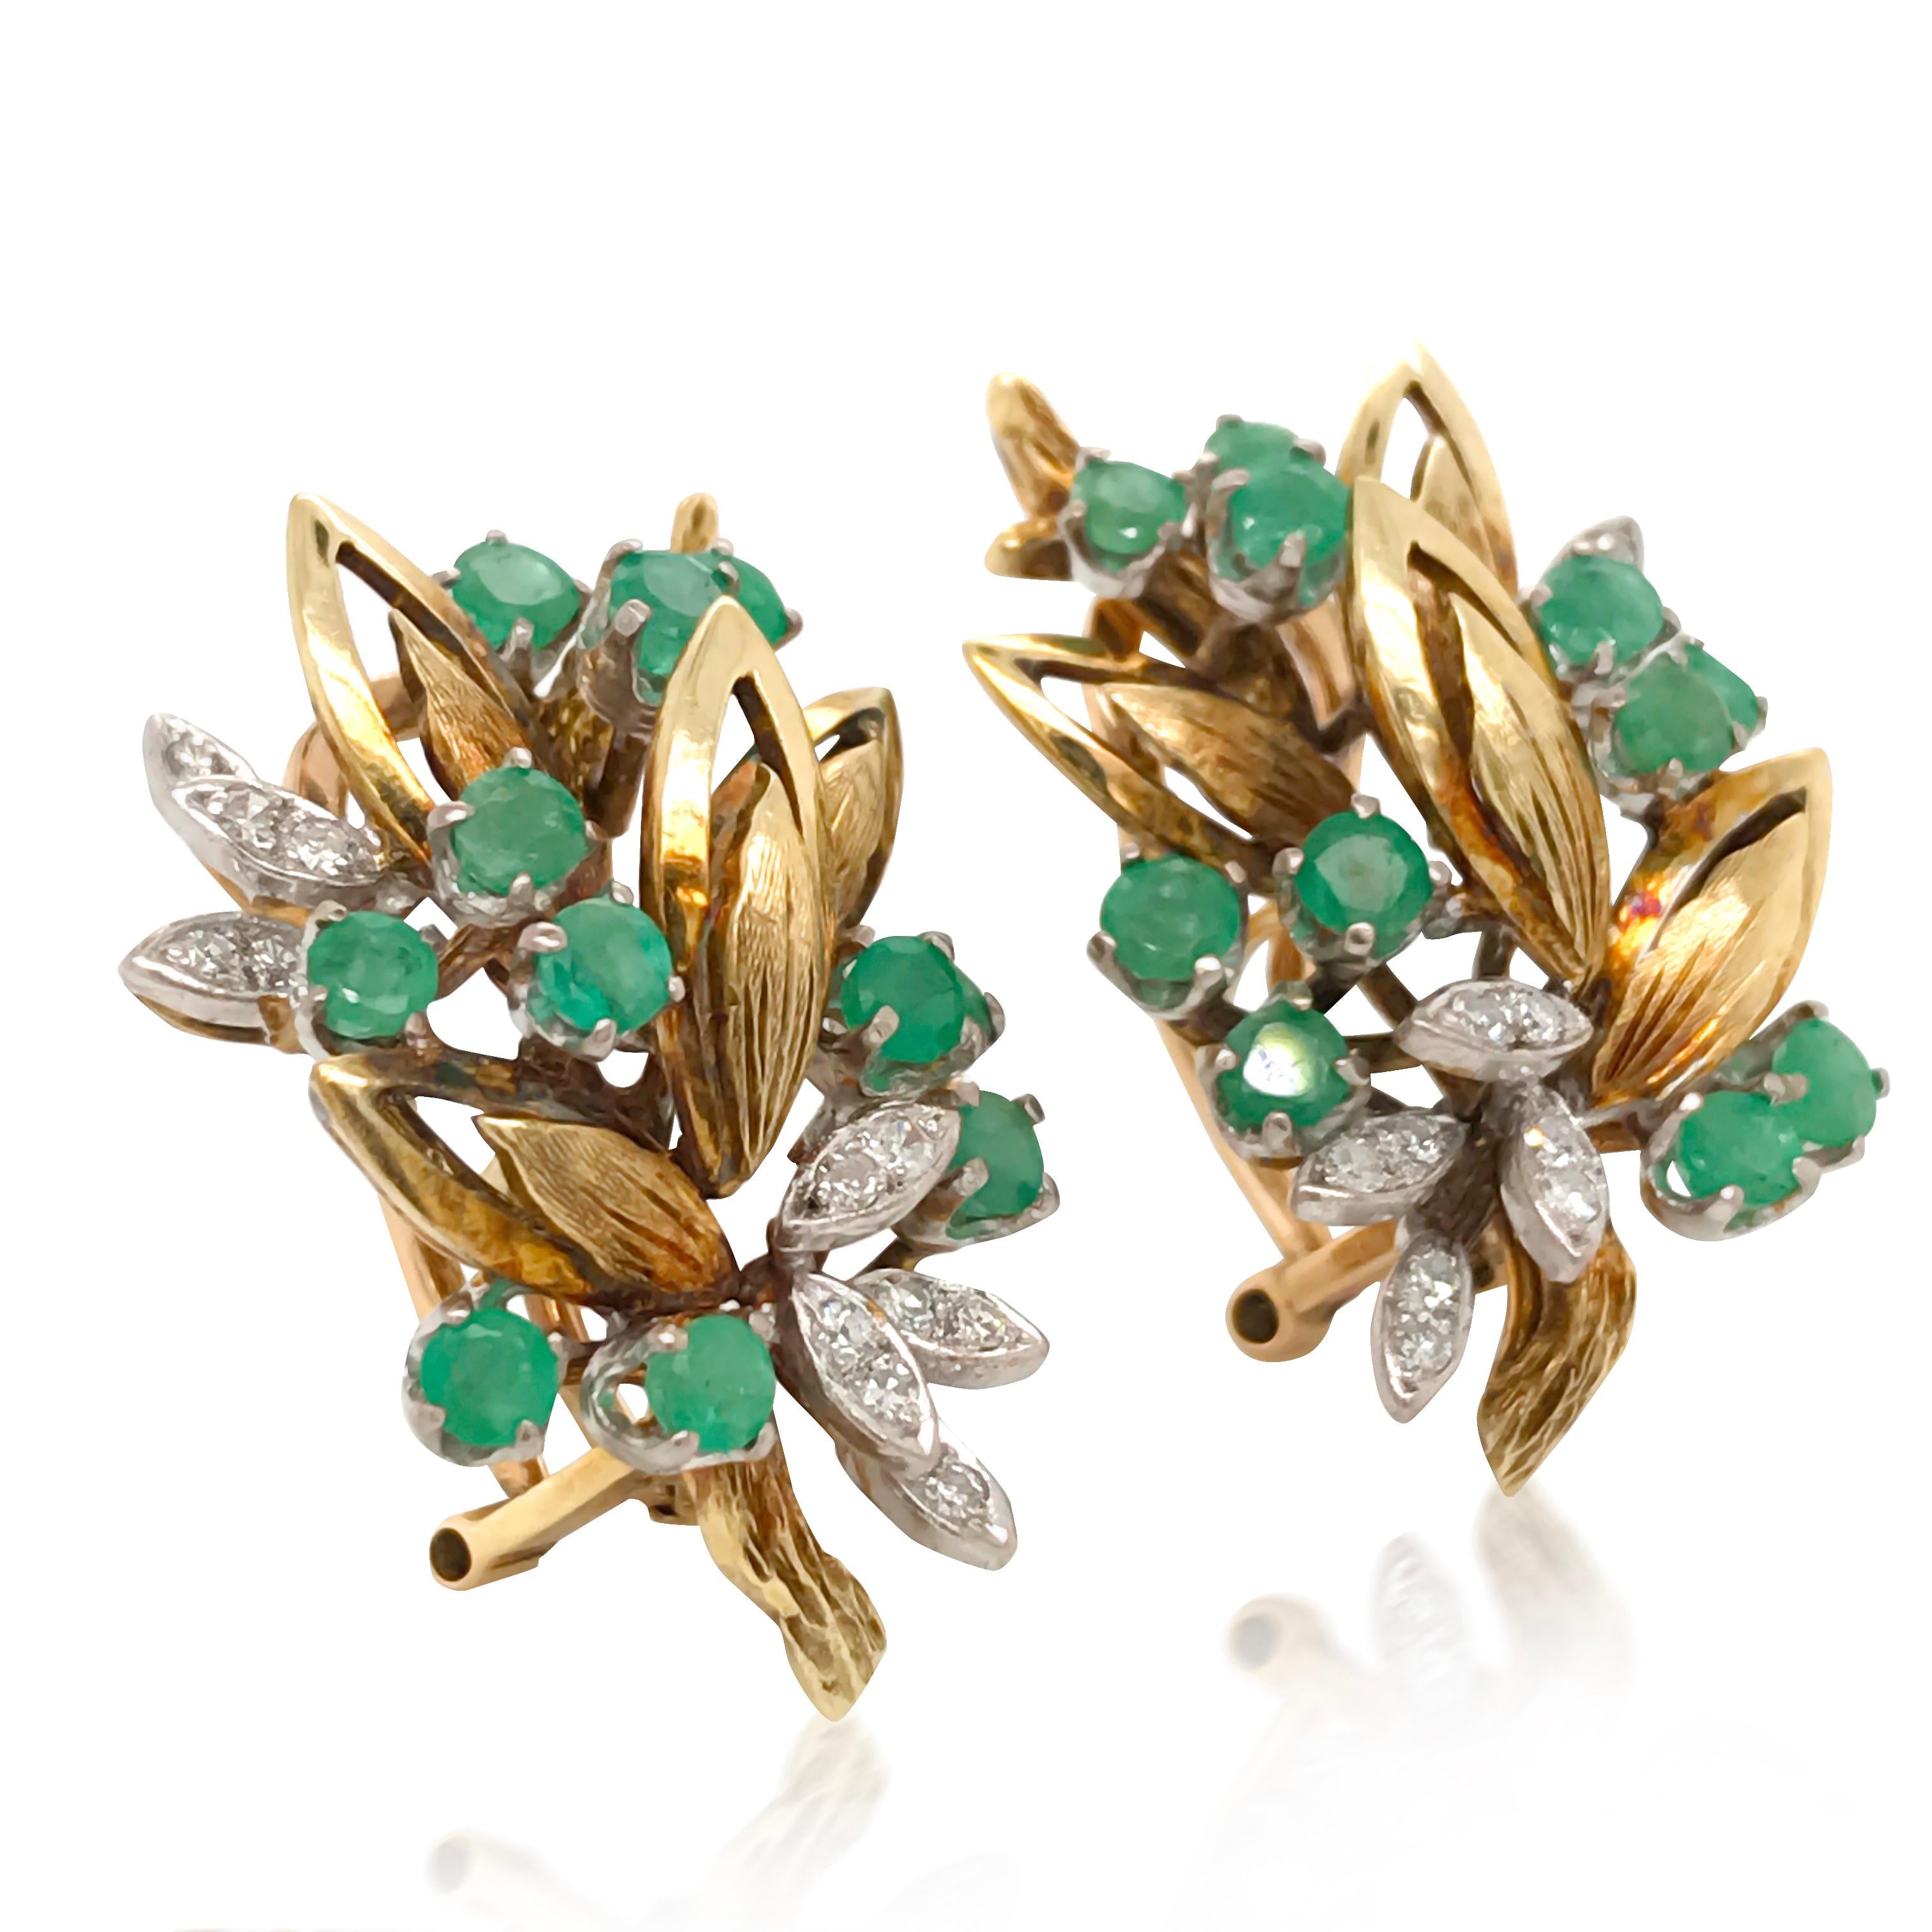 This alluring and cute pair of gold earrings features 14K fine-grained gold work highly decorated with emeralds and diamonds. The total 22 round cut emeralds weigh approx. 2.0cts, and the total 14 marquise cut diamonds weigh approx. 1.5cts. The